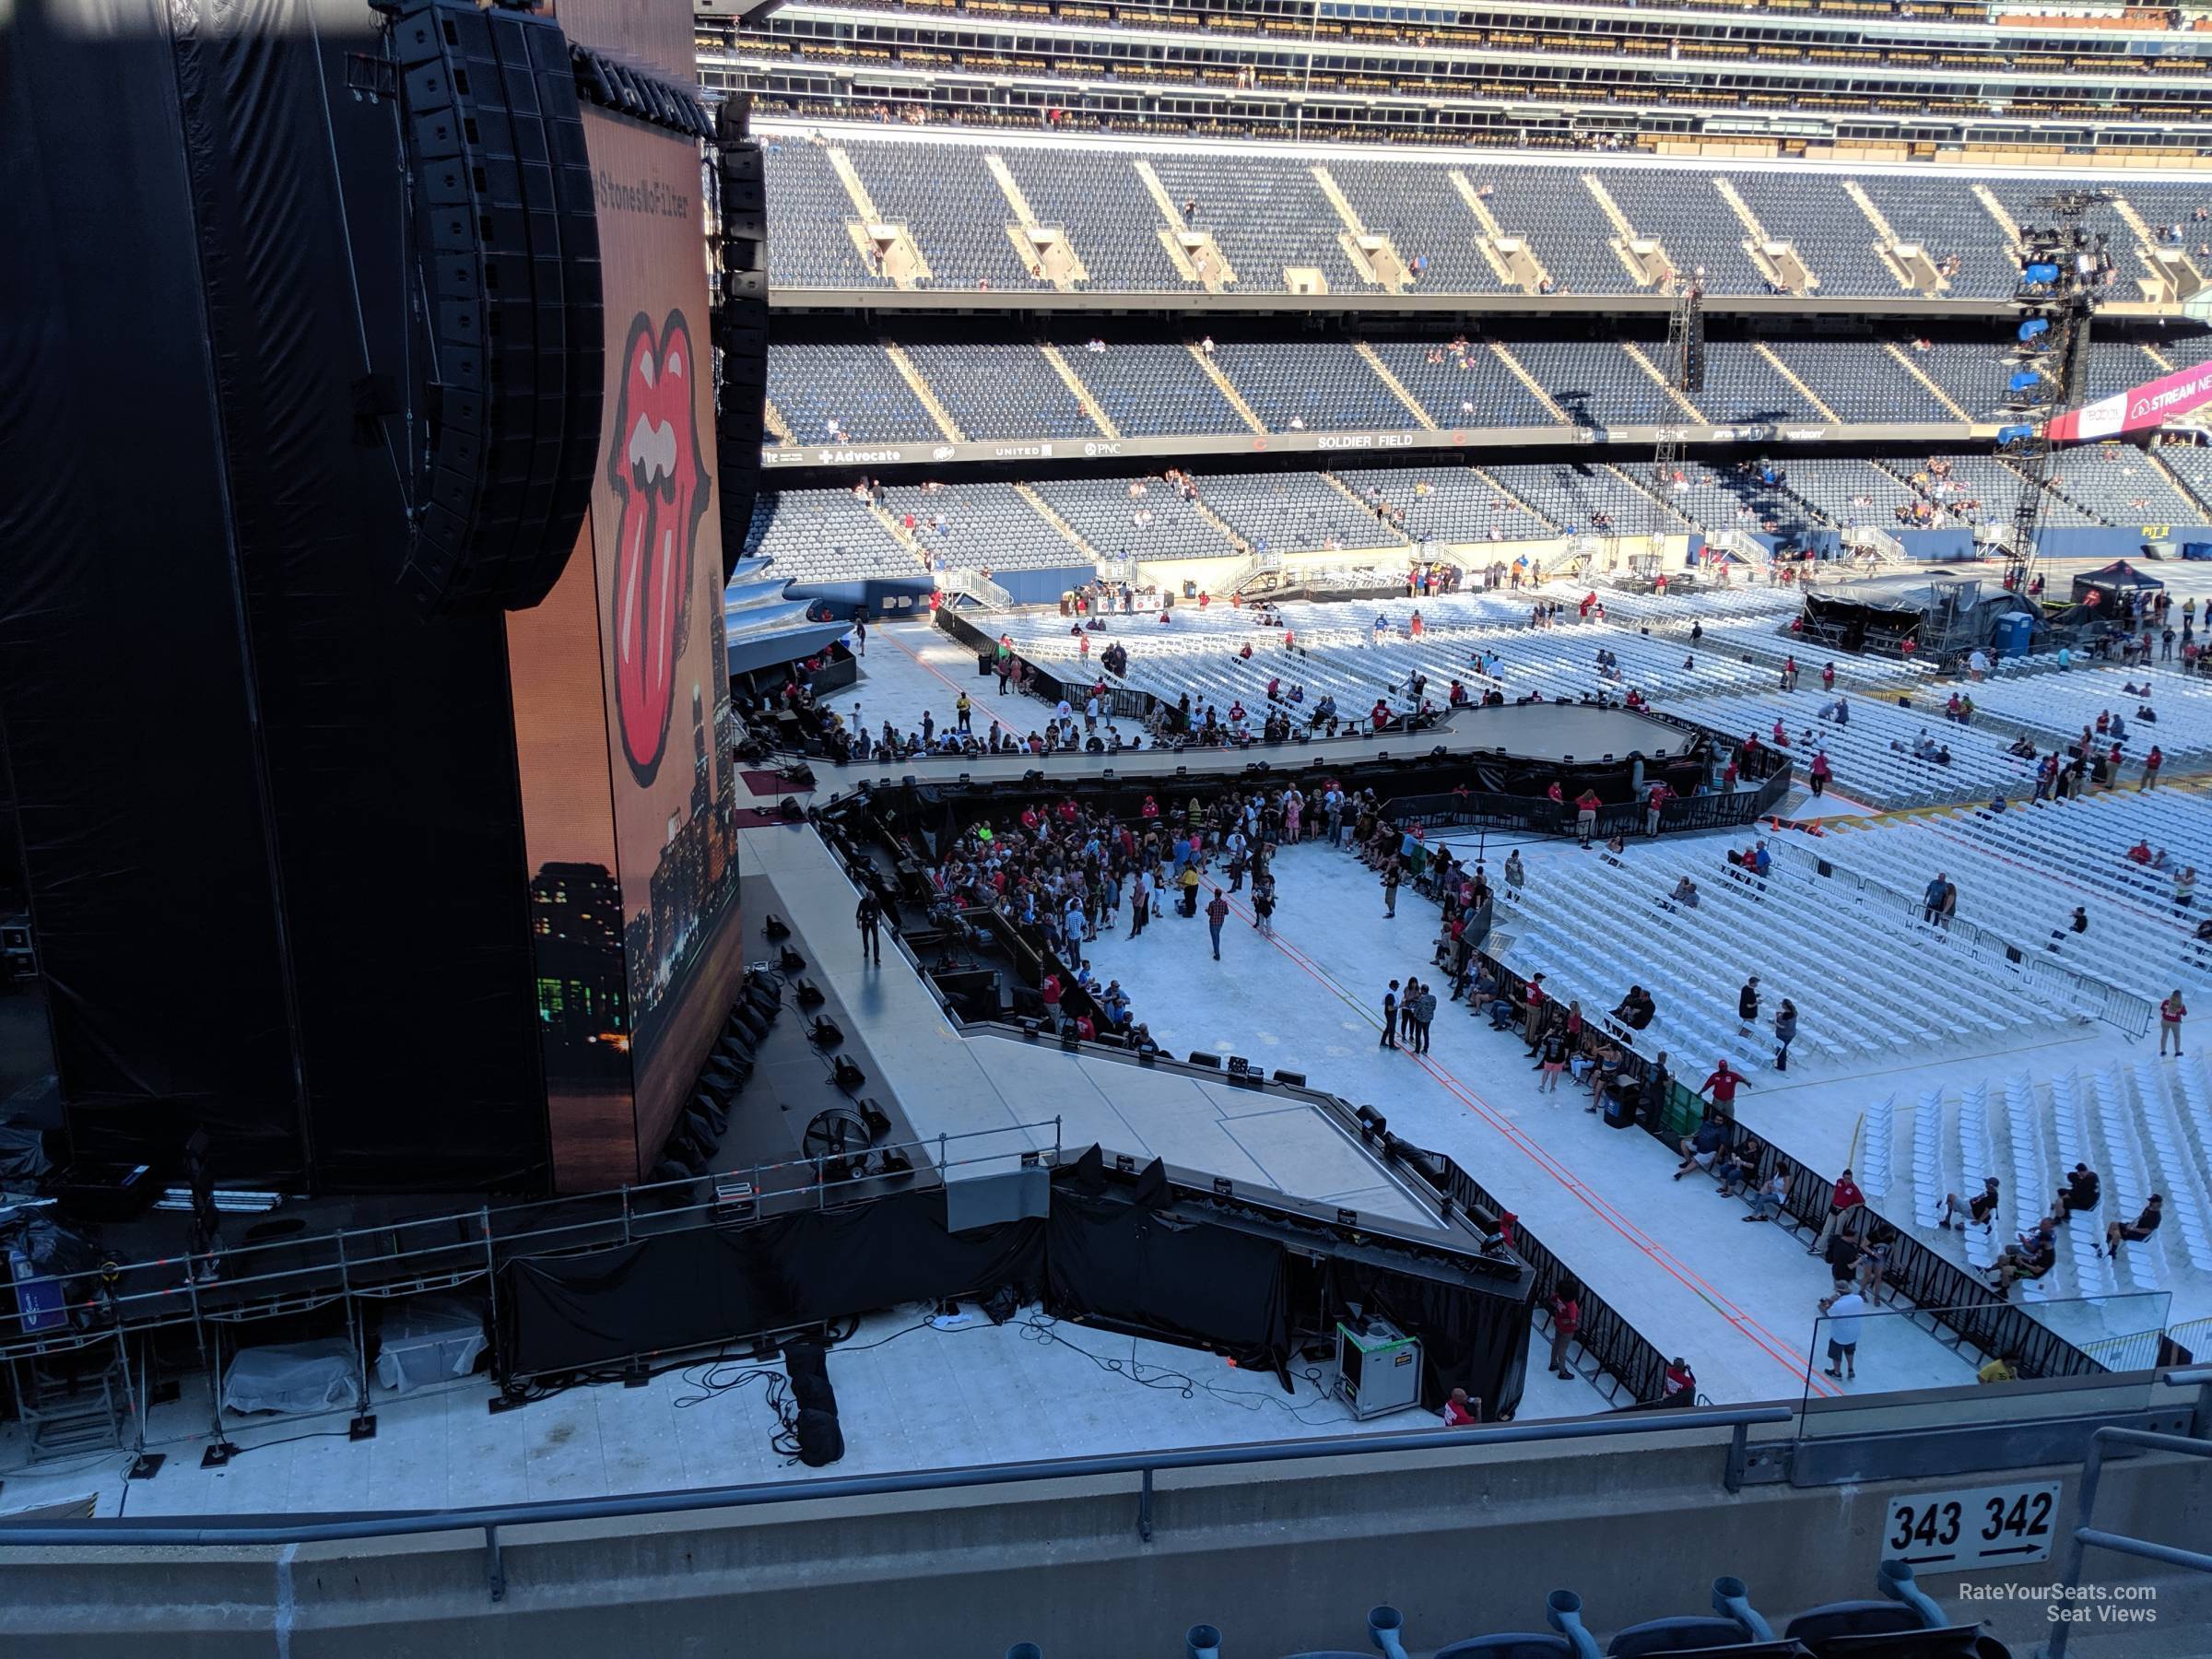 section 343, row 6 seat view  for concert - soldier field